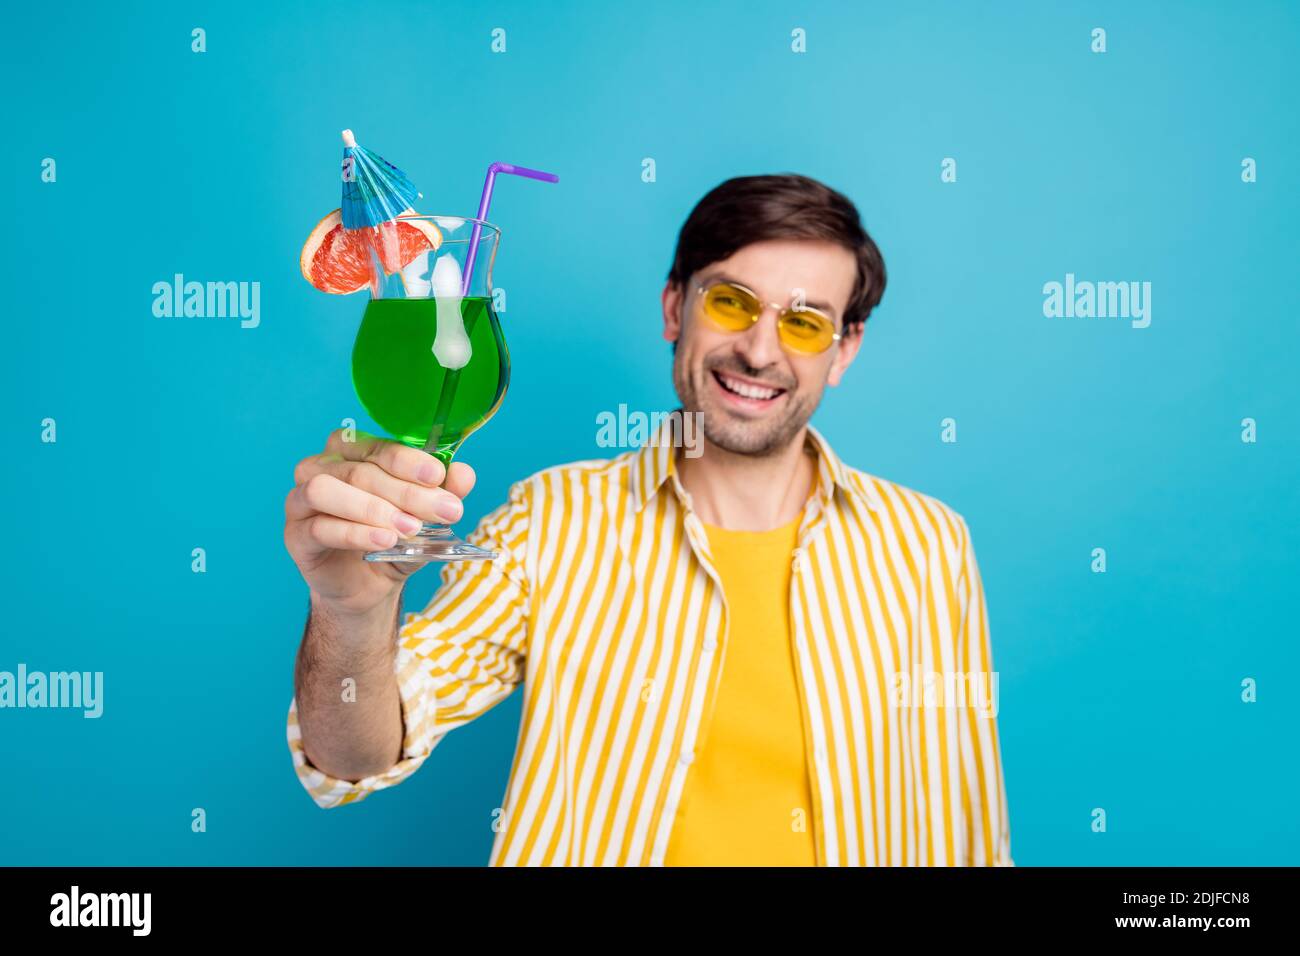 https://c8.alamy.com/comp/2DJFCN8/blurred-photo-of-positive-cheerful-man-tourist-enjoy-resort-chilling-look-hold-alcohol-cocktail-wear-white-clothes-isolated-over-blue-color-background-2DJFCN8.jpg